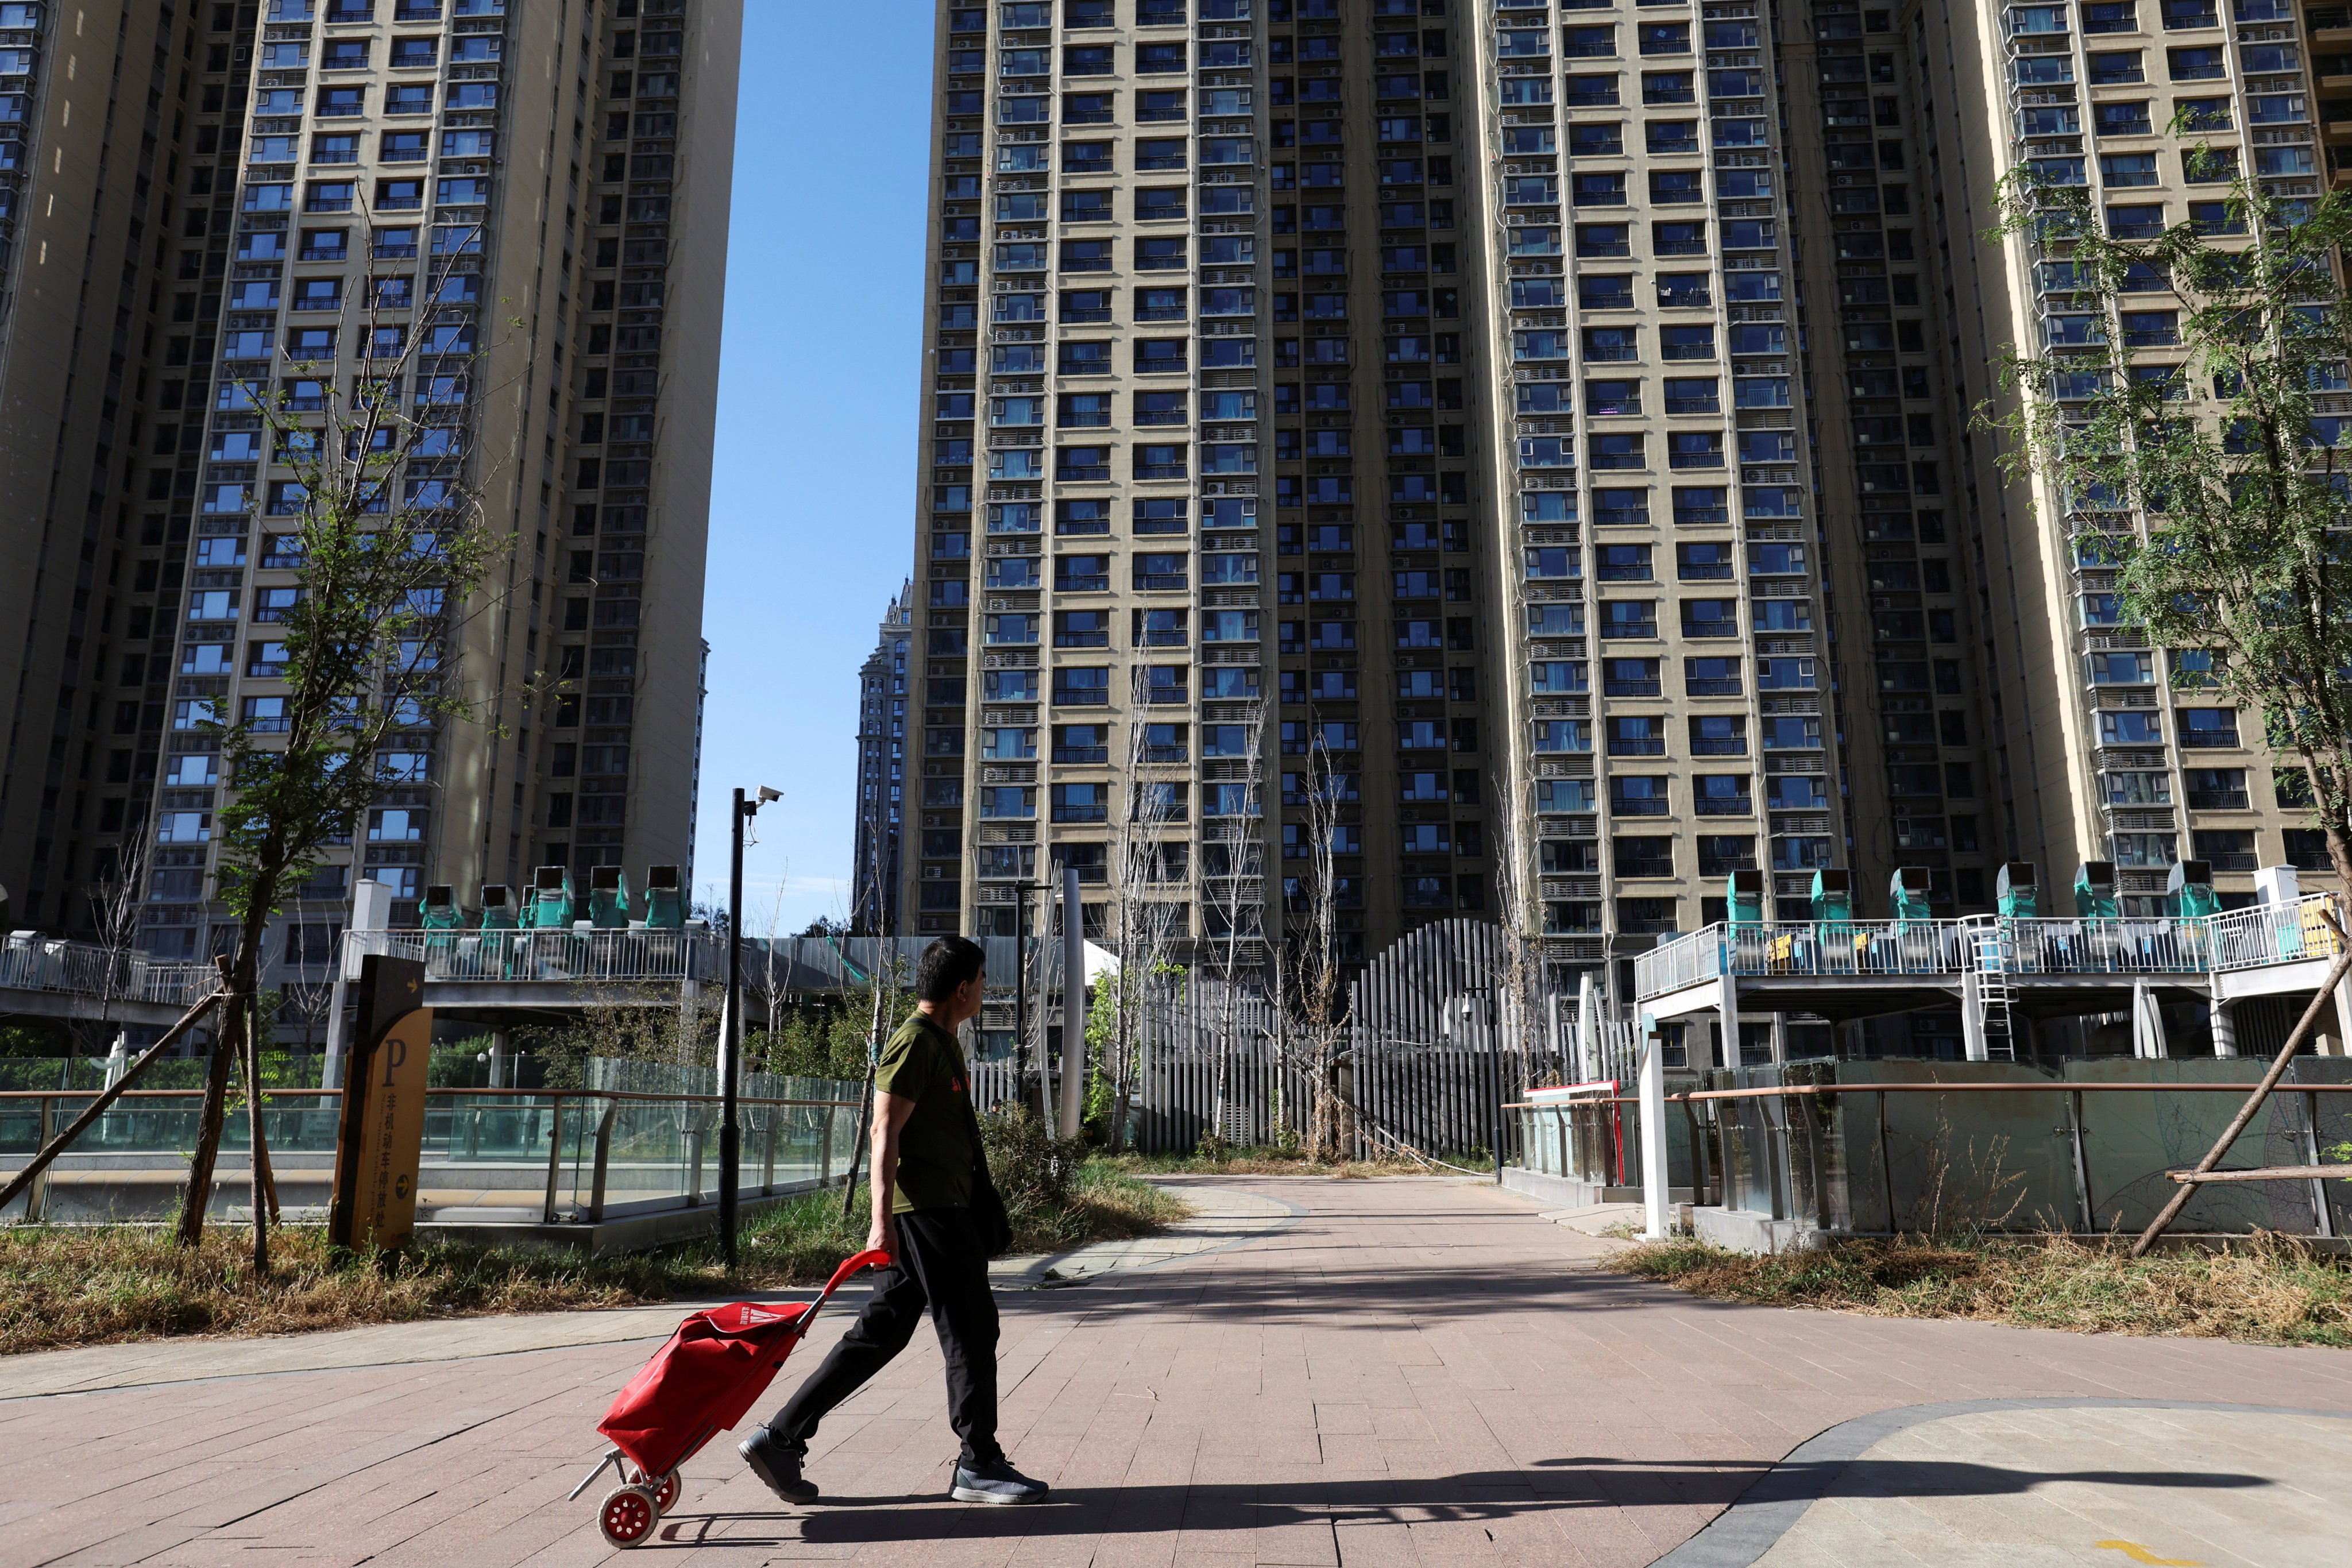 An Evergrande residential complex in Beijing. Photo: Reuters